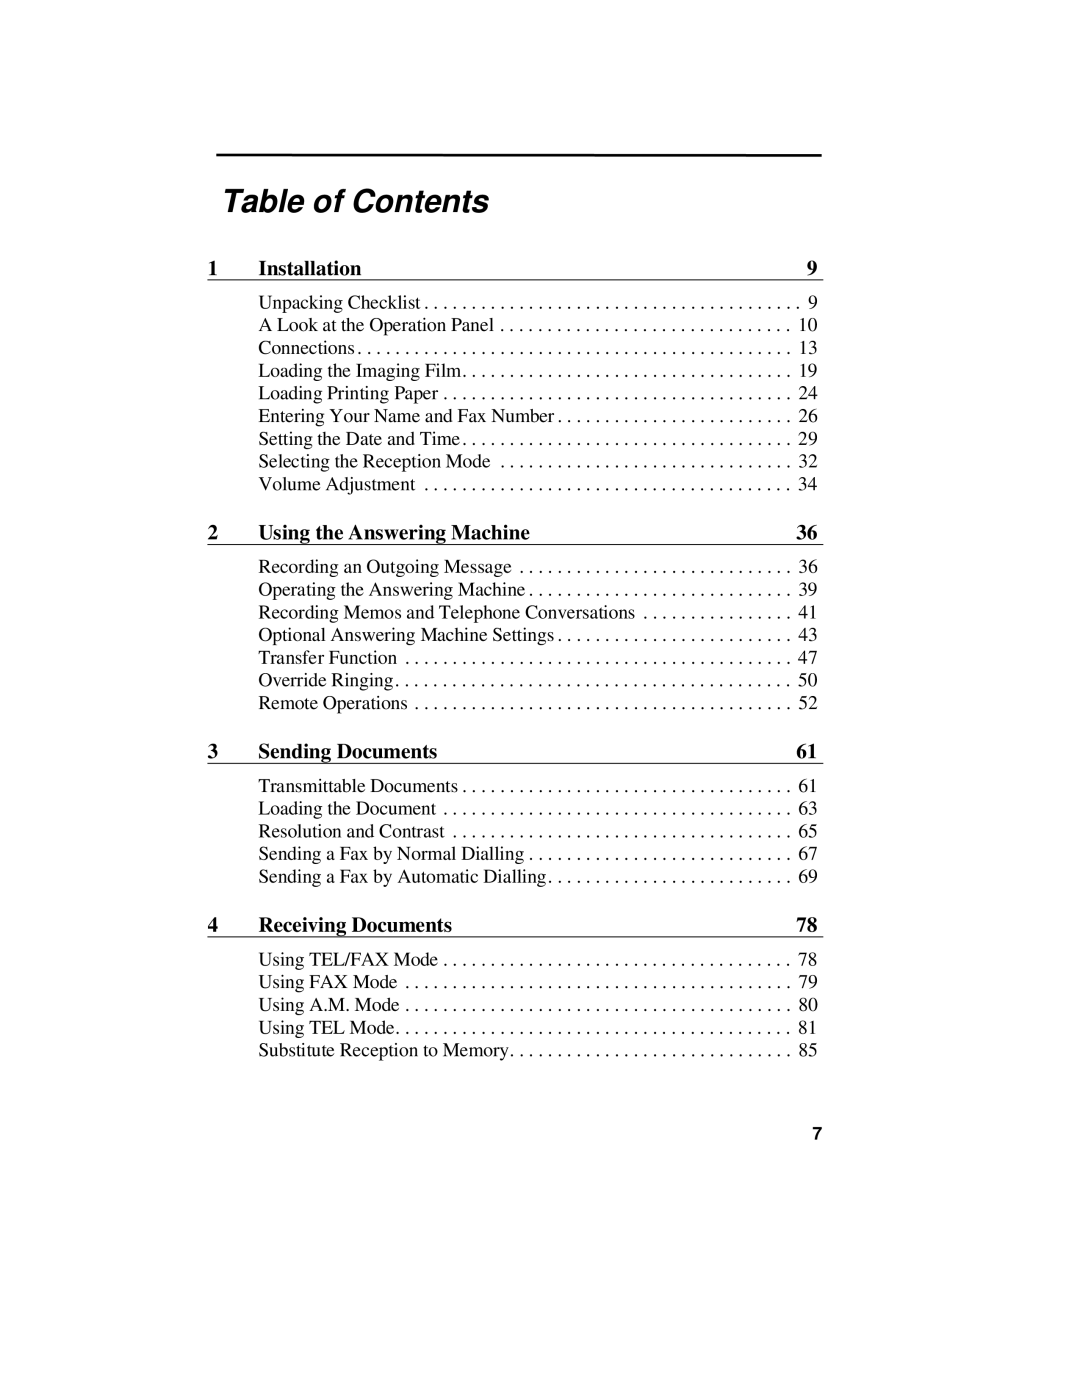 Sharp UX-470 operation manual Table of Contents 